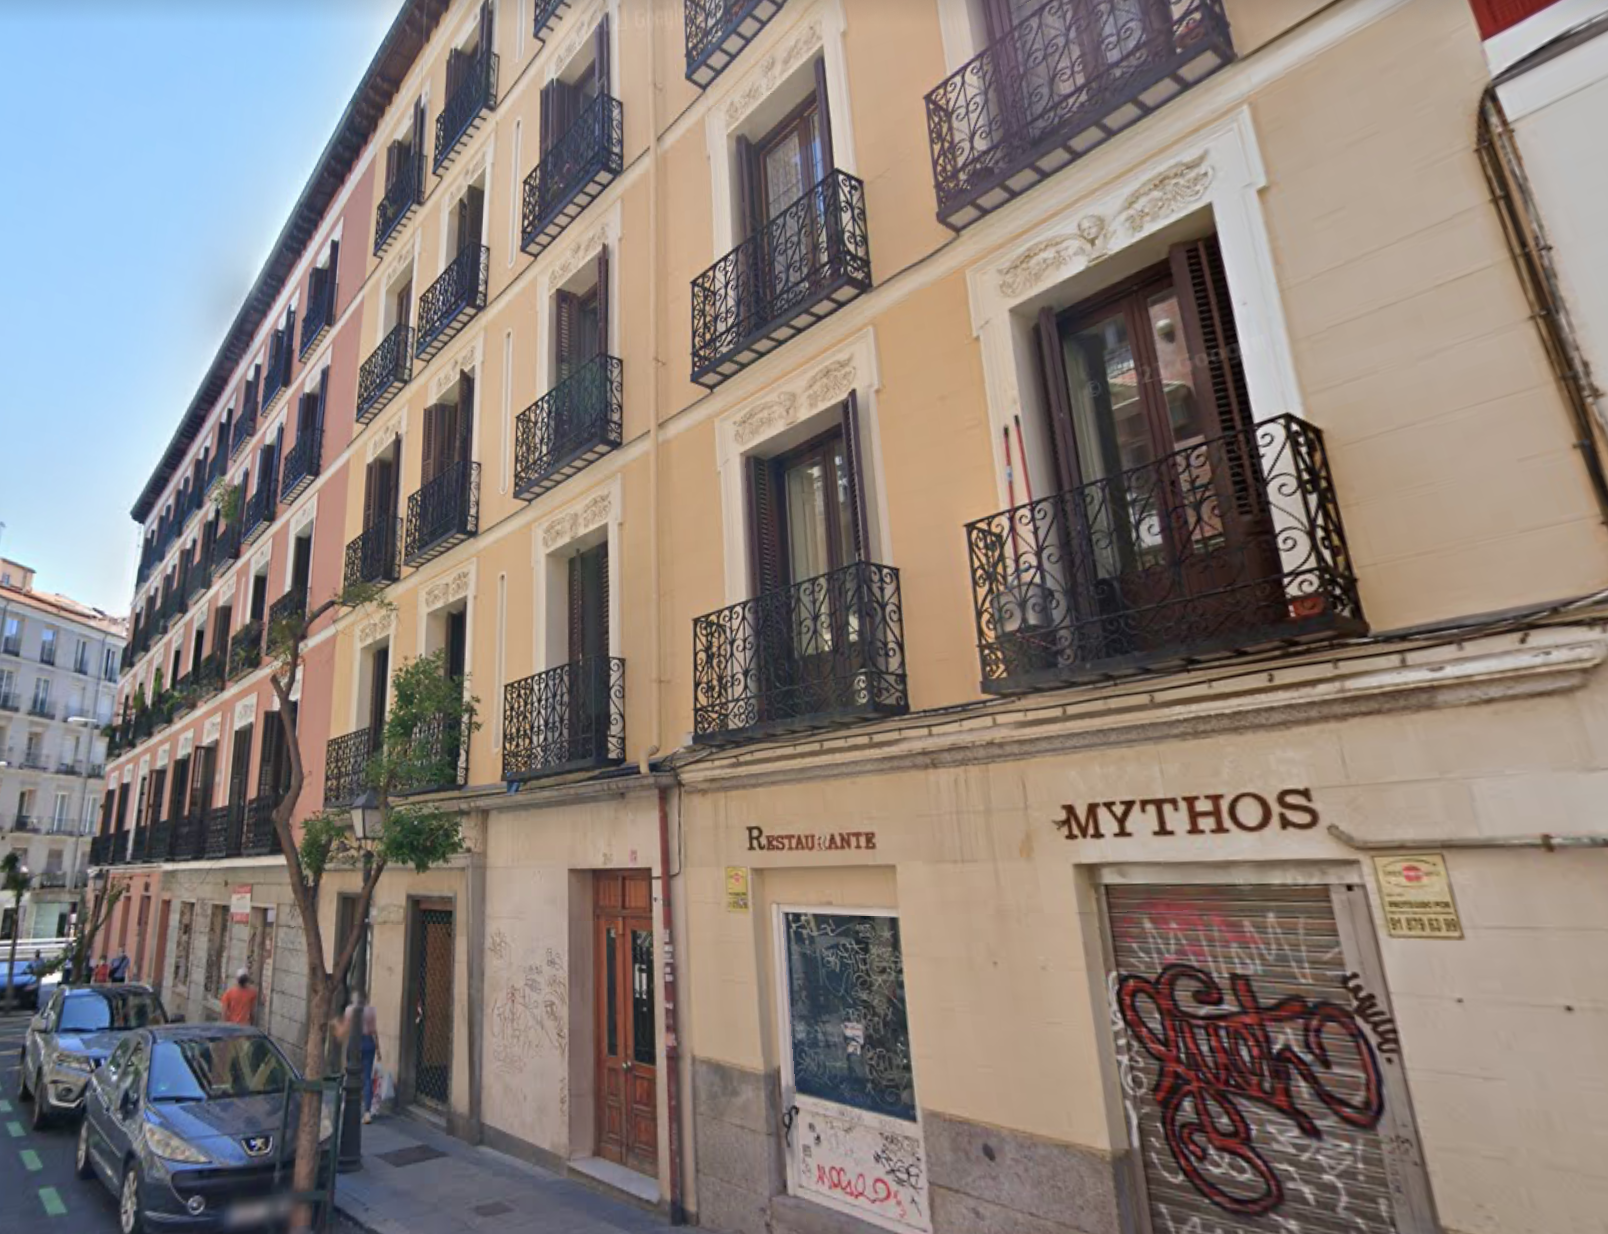 Home Capital buys a property in the center of Madrid for €4.6M